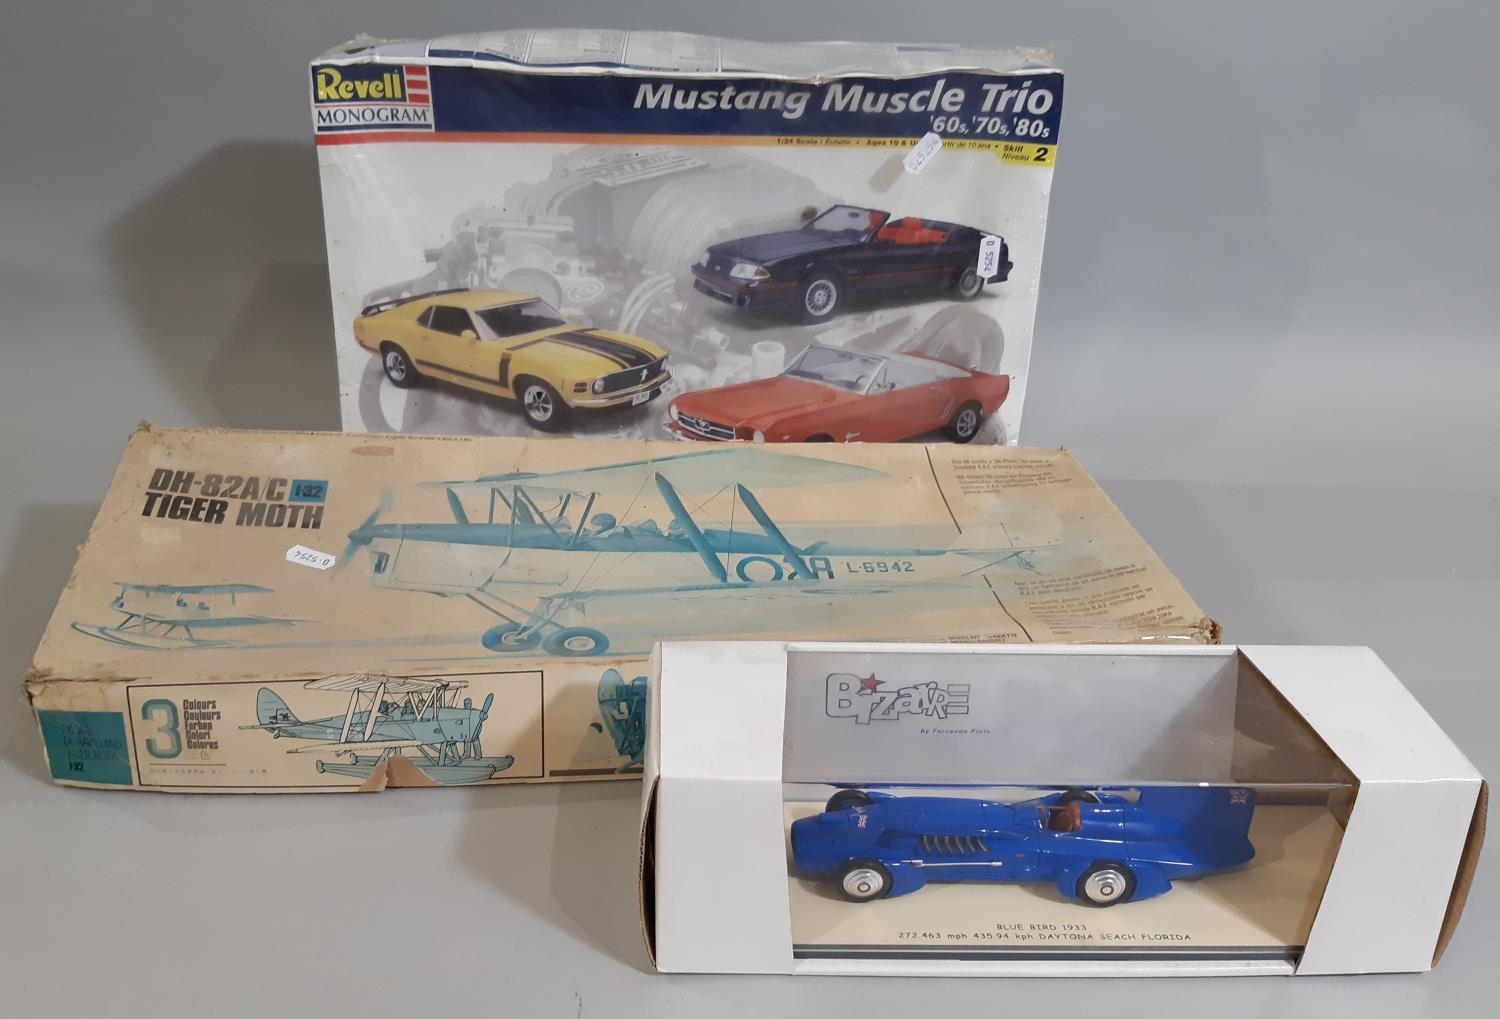 3 boxed models; Mustang Muscle Trio by Revell 1:24 scale, a 'Bluebird 1933' model racing car 1:43